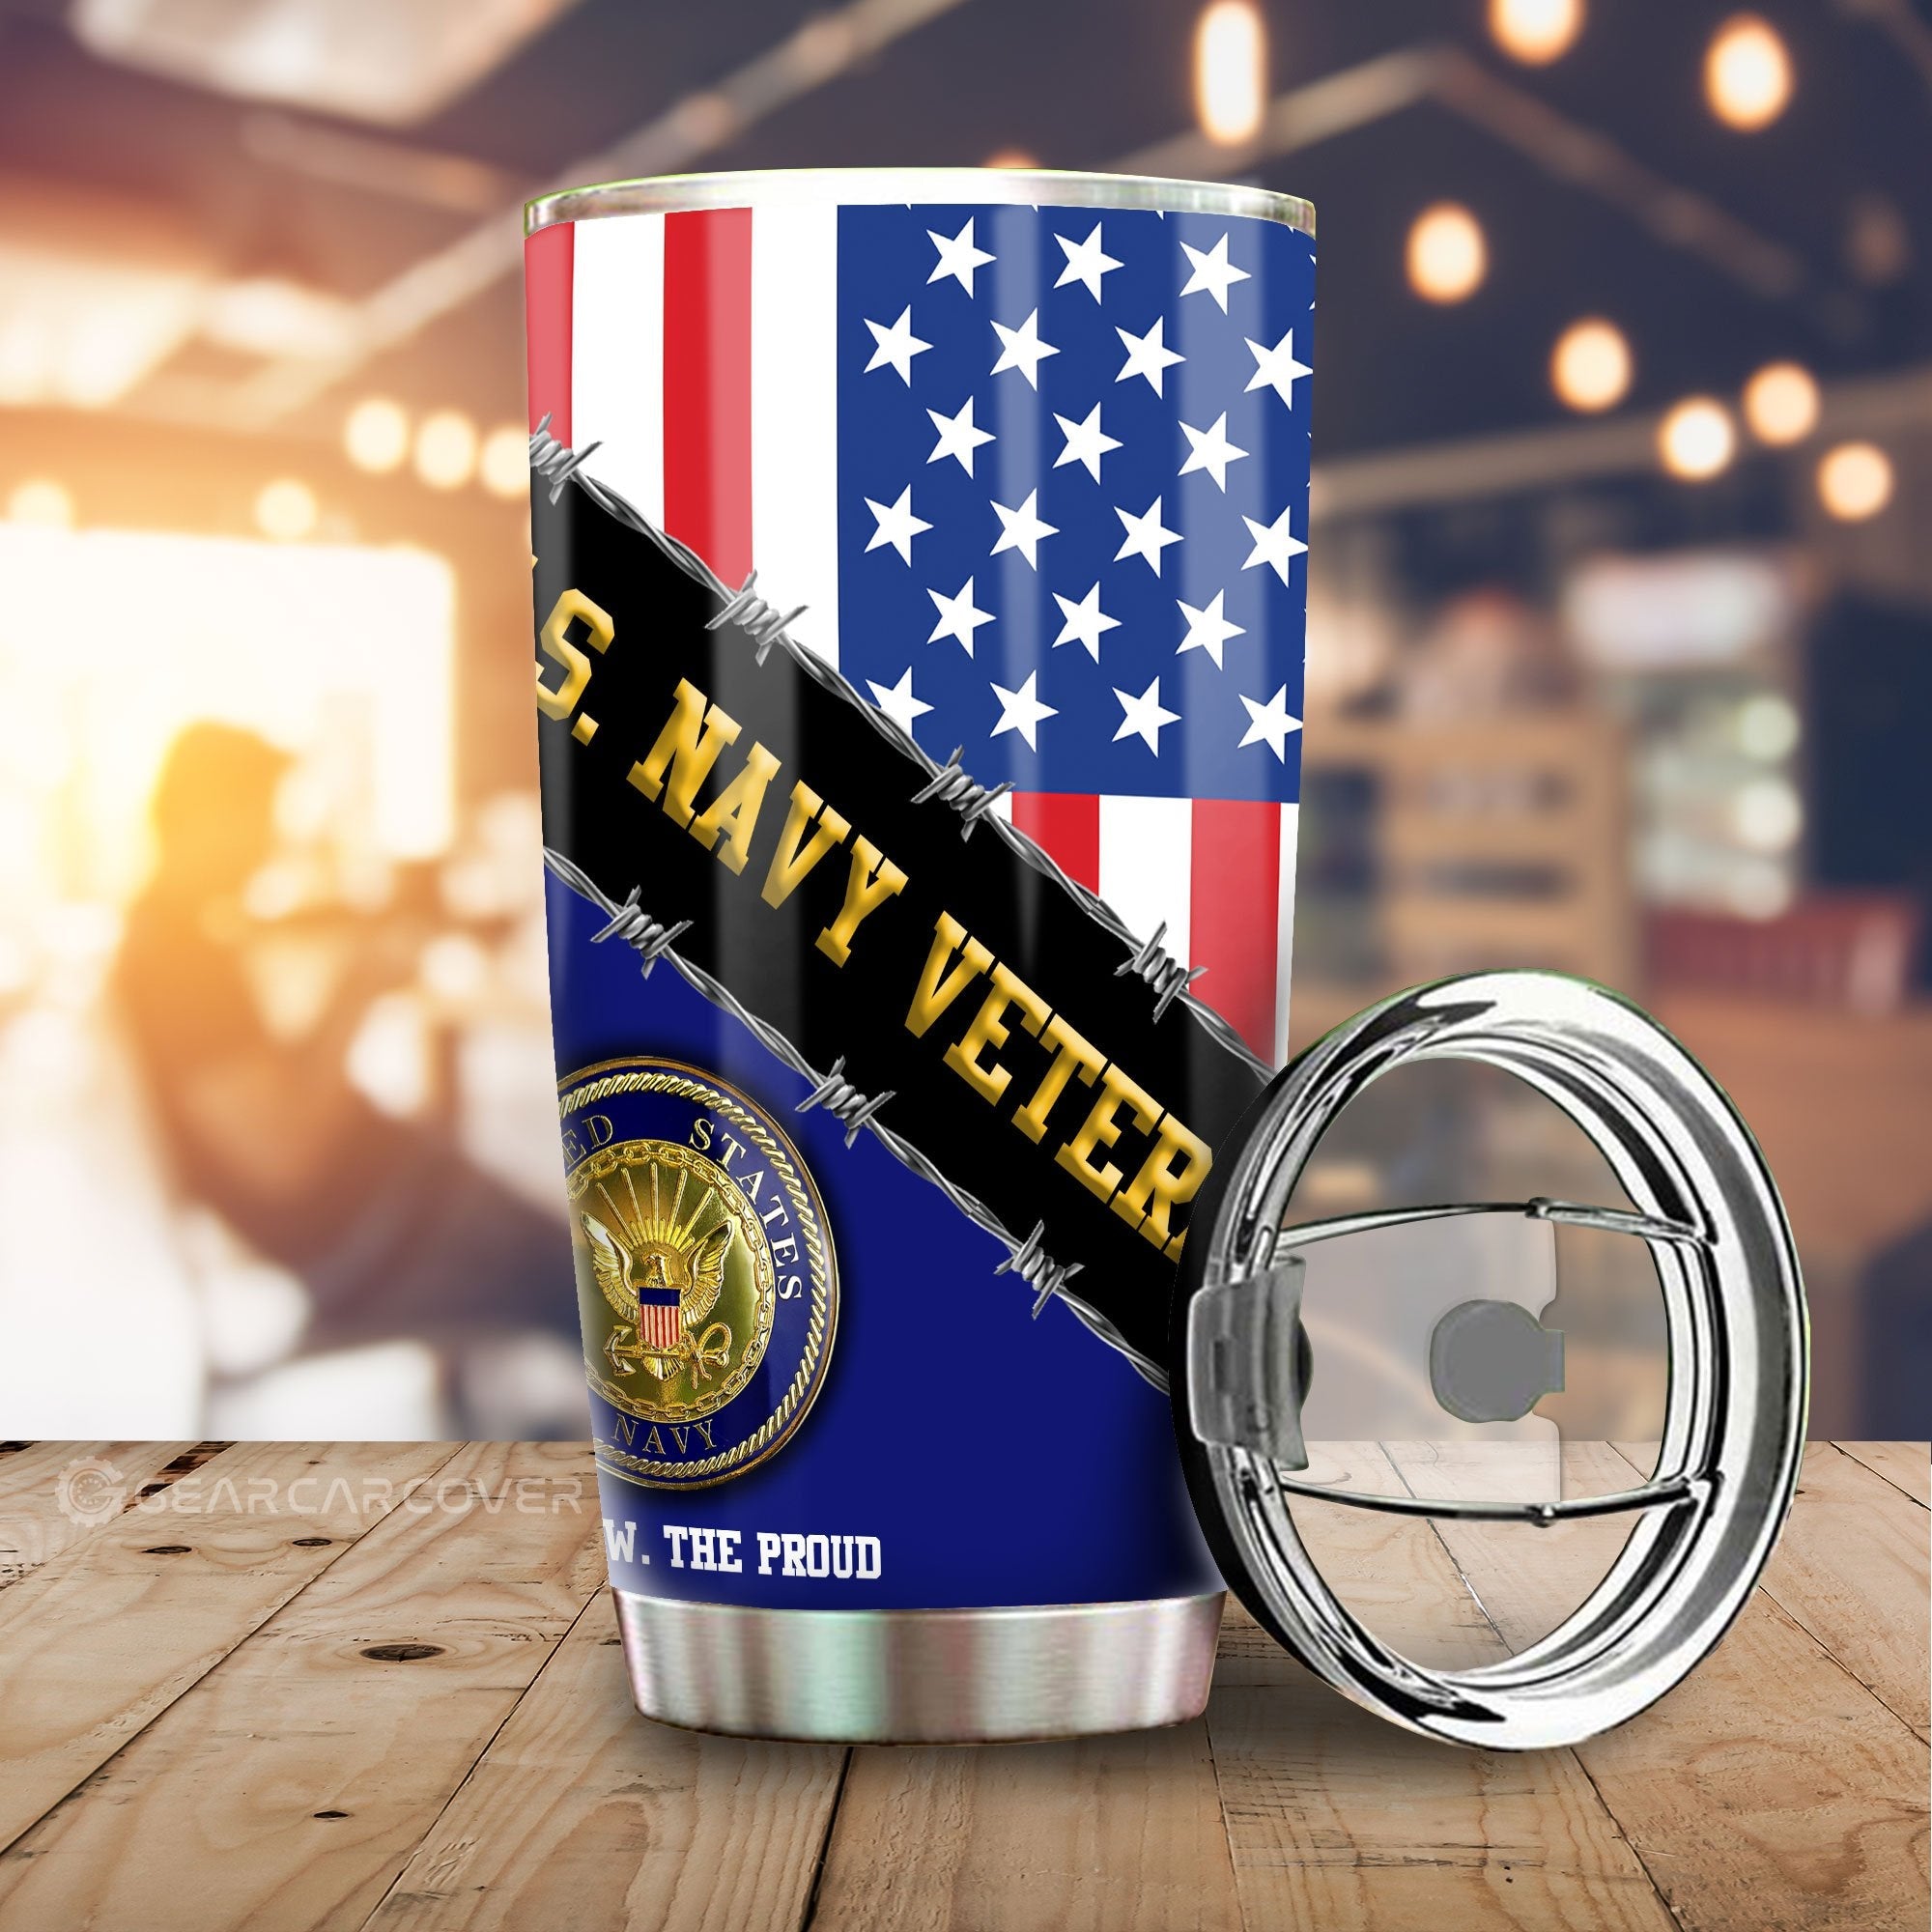 U.S. Navy Veterans Tumbler Cup Custom United States Military Car Accessories - Gearcarcover - 1